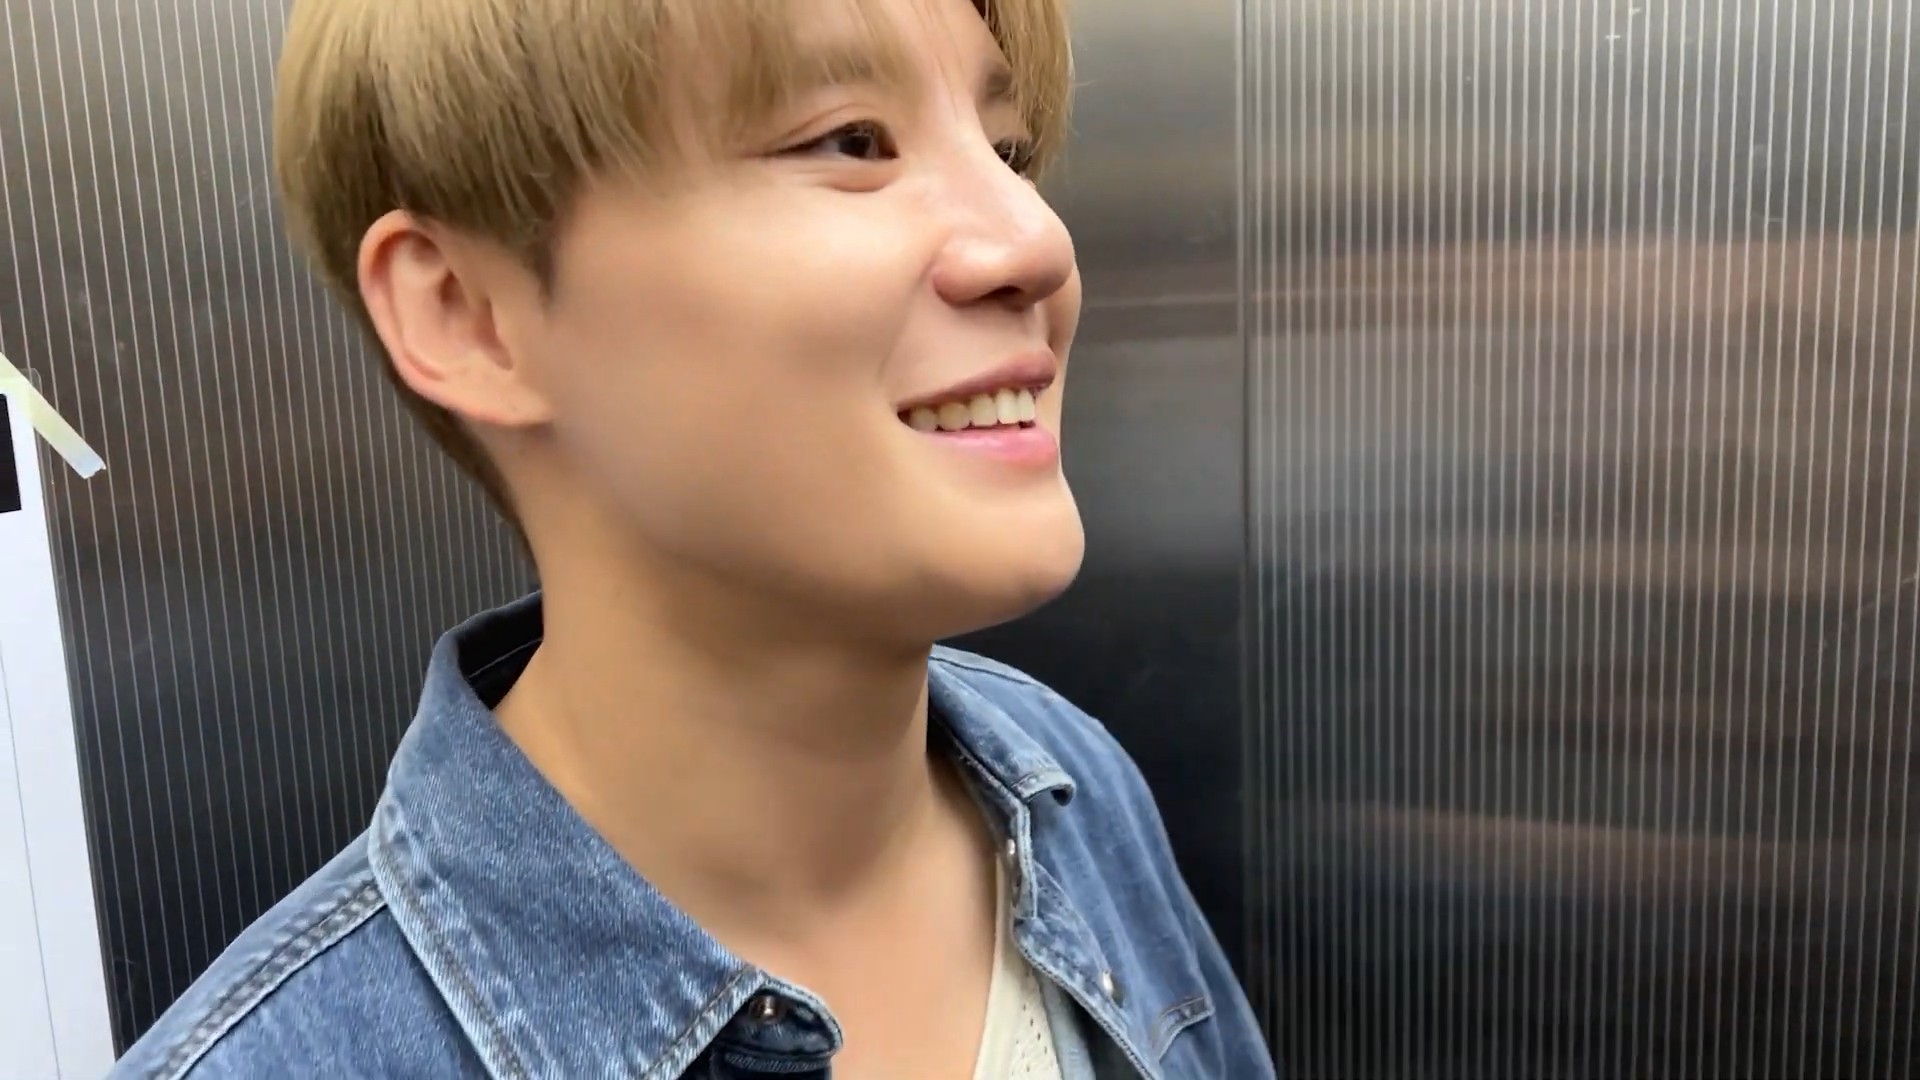 XIA l Behind the Scenes Concert Movie chapter 1 Stage greeting24.jpg